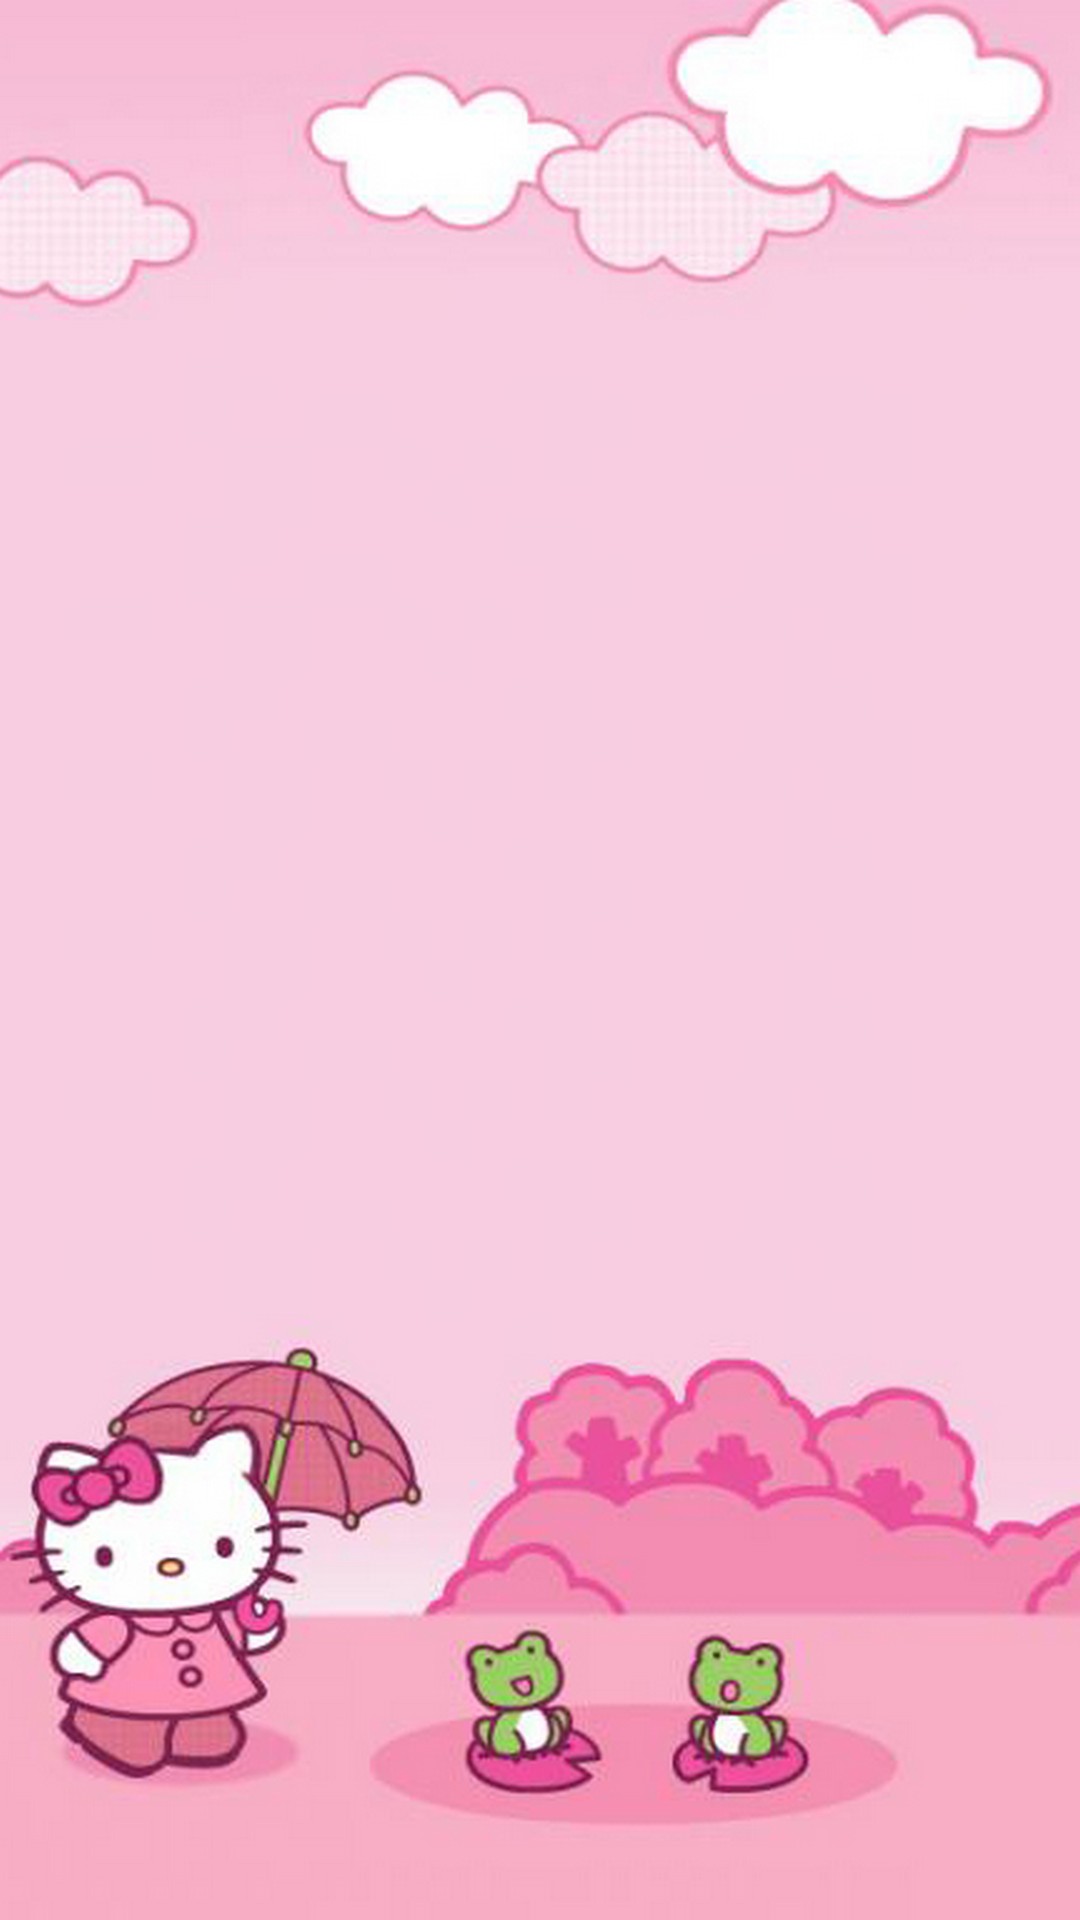 Wallpaper iPhone Sanrio Hello Kitty with resolution 1080X1920 pixel. You can make this wallpaper for your iPhone 5, 6, 7, 8, X backgrounds, Mobile Screensaver, or iPad Lock Screen